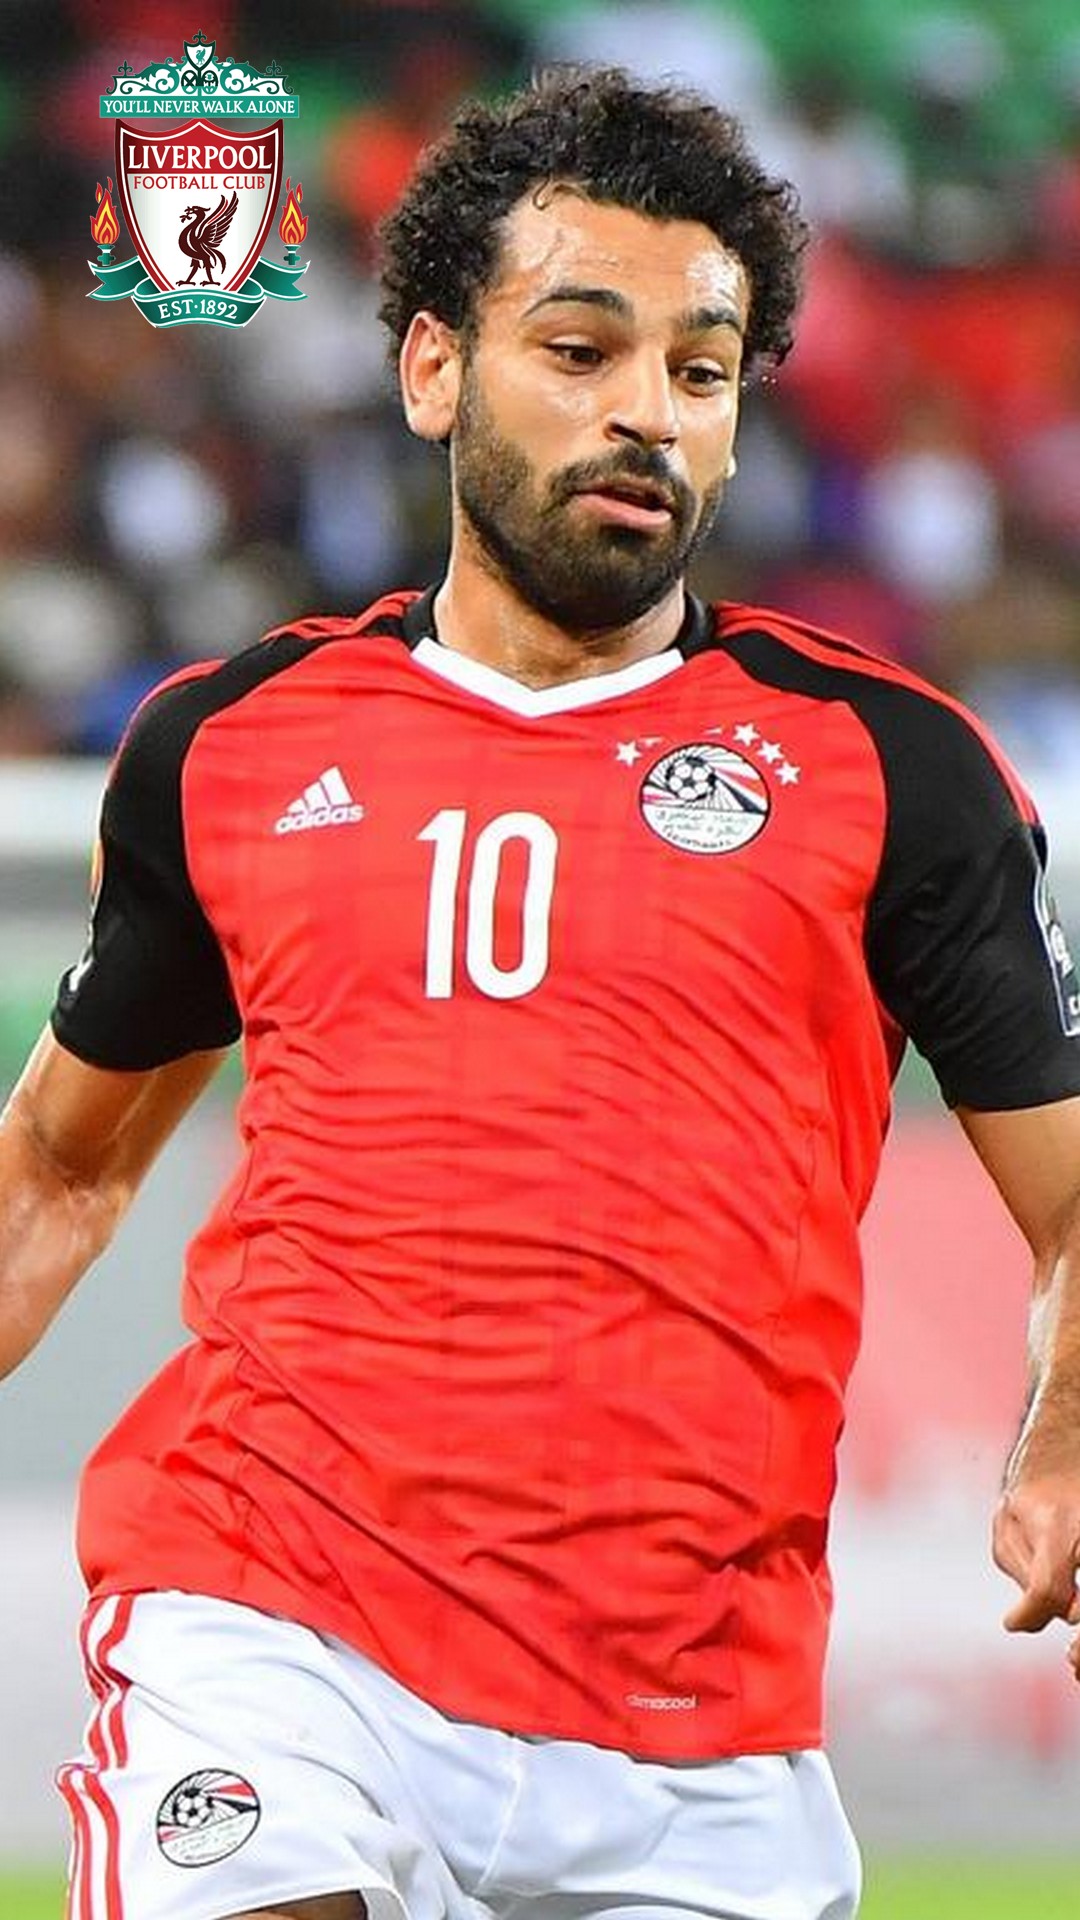 Wallpaper Mo Salah iPhone with image resolution 1080x1920 pixel. You can make this wallpaper for your iPhone 5, 6, 7, 8, X backgrounds, Mobile Screensaver, or iPad Lock Screen